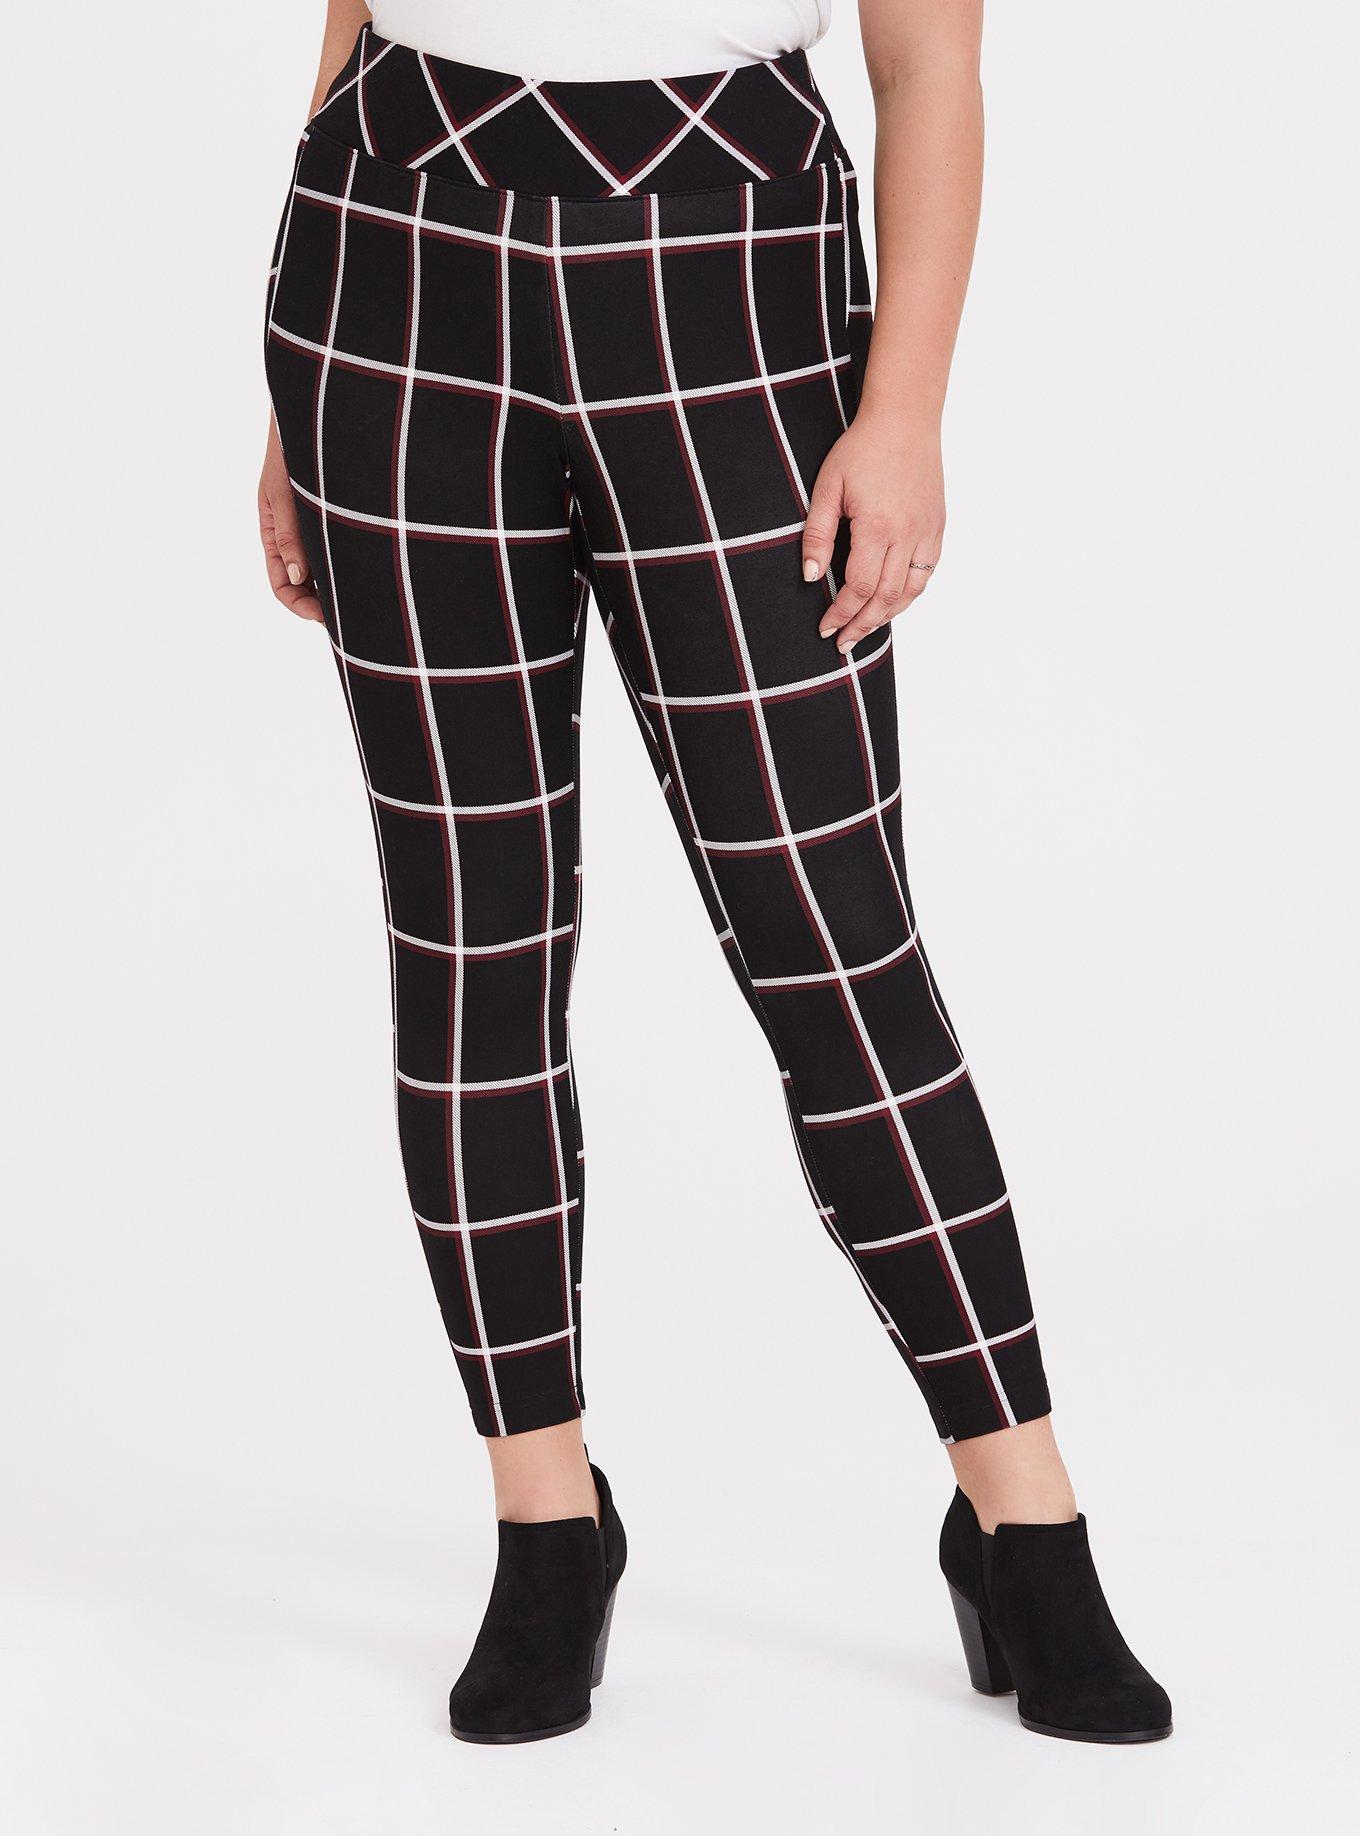 Pocket Pixie Flare Studio Luxe Ponte High-Rise Pant  Bottom clothes, High  rise pants, Black pants outfit dressy classy